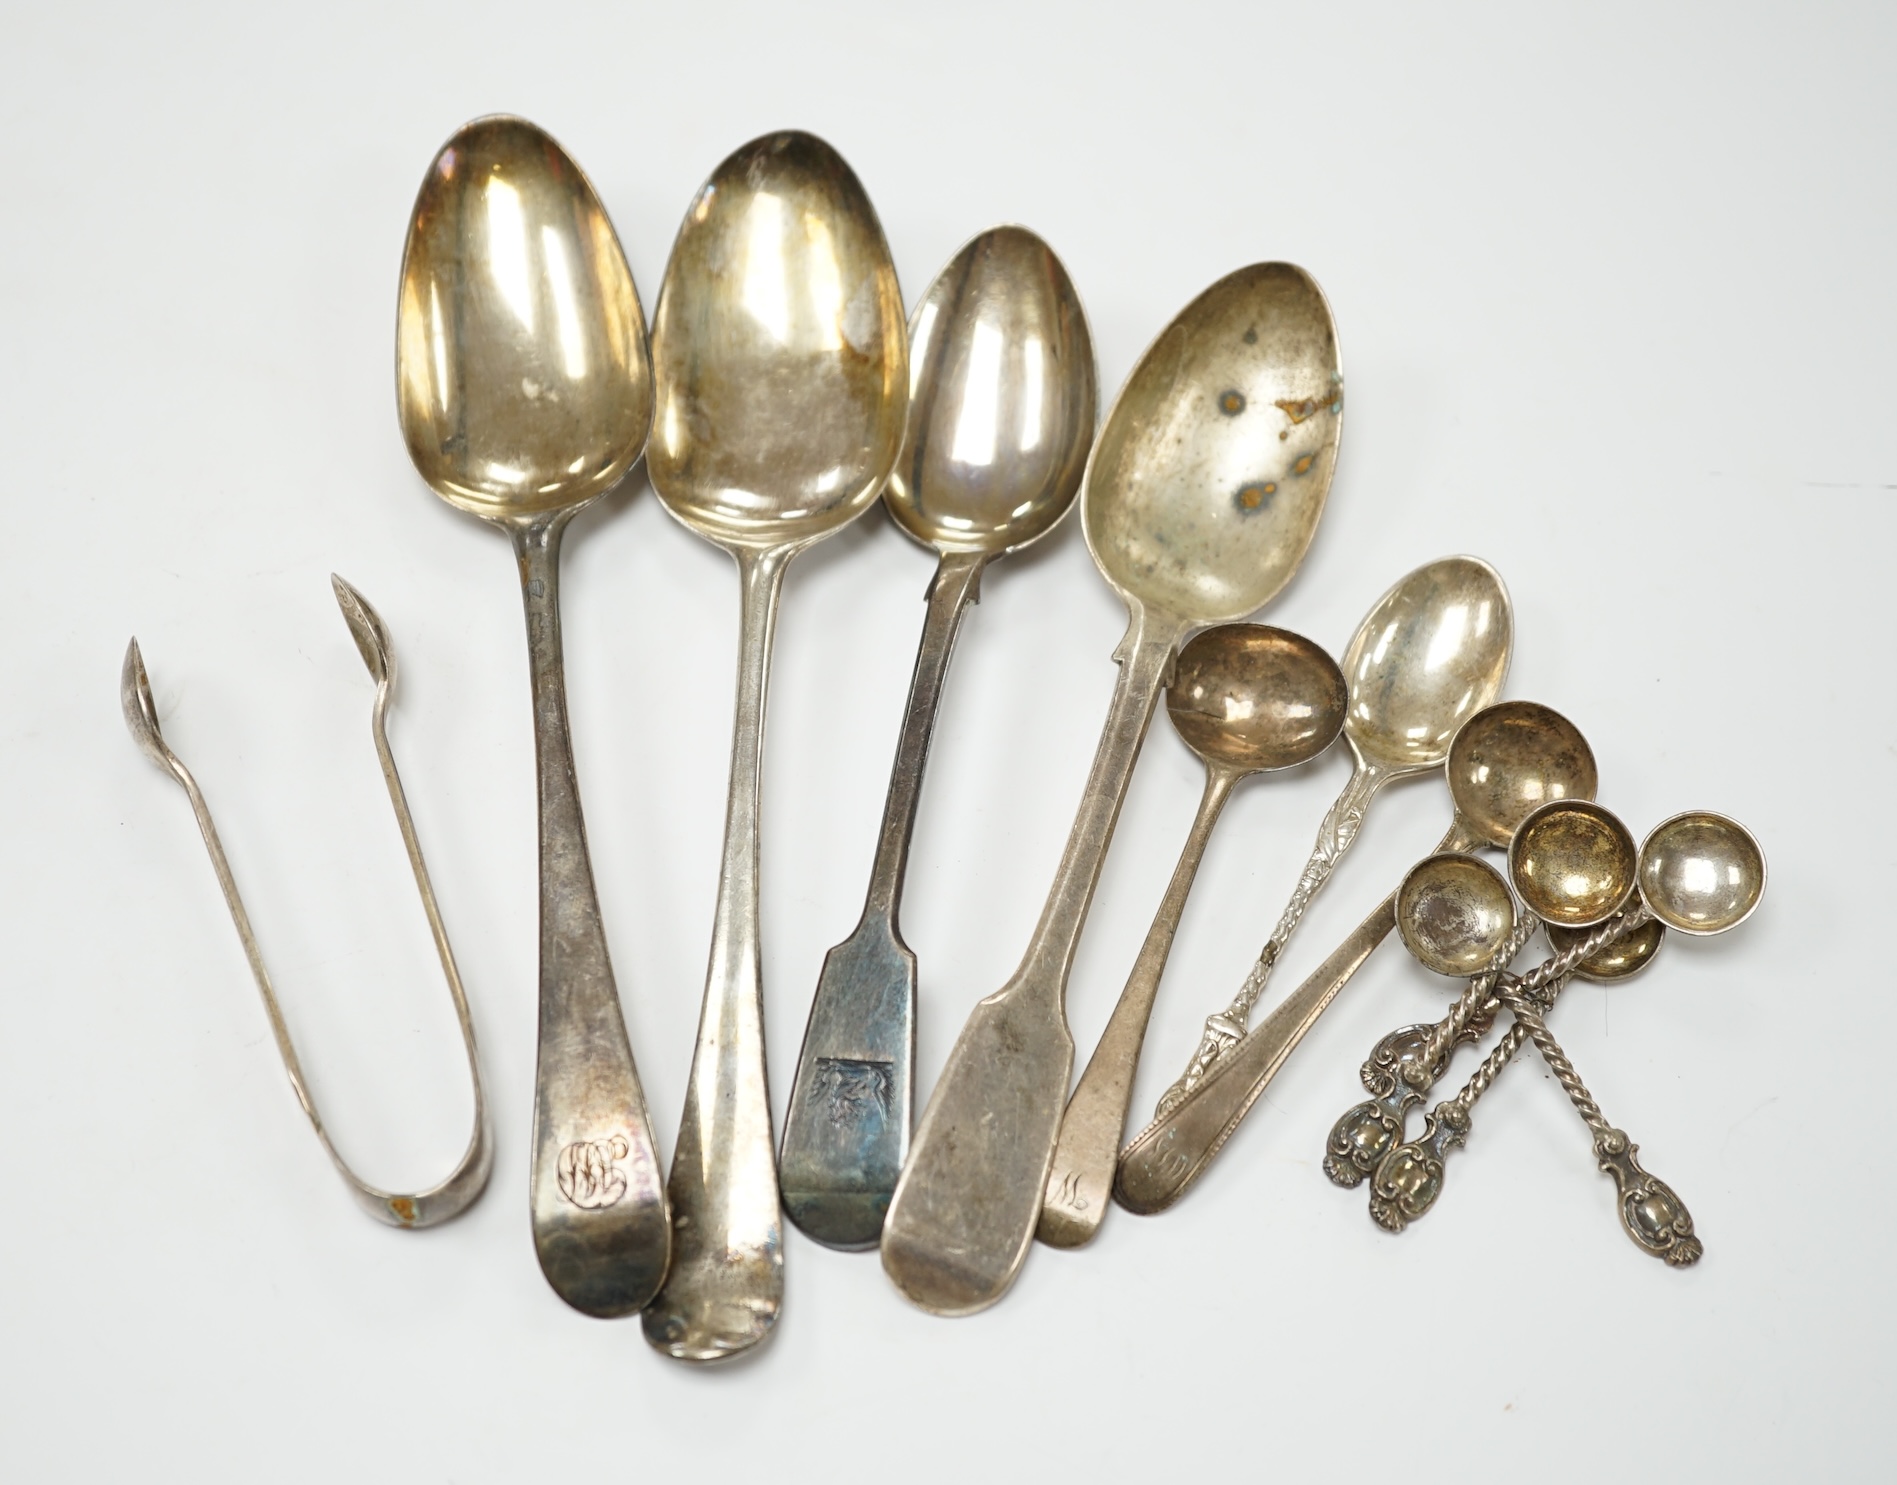 A quantity of mainly 19th century and later silver flatware, including table spoon, dessert spoons, teaspoons, condiment spoons, etc. and other items including two wine labels and a cased 9ct gold mounted amber cigarette